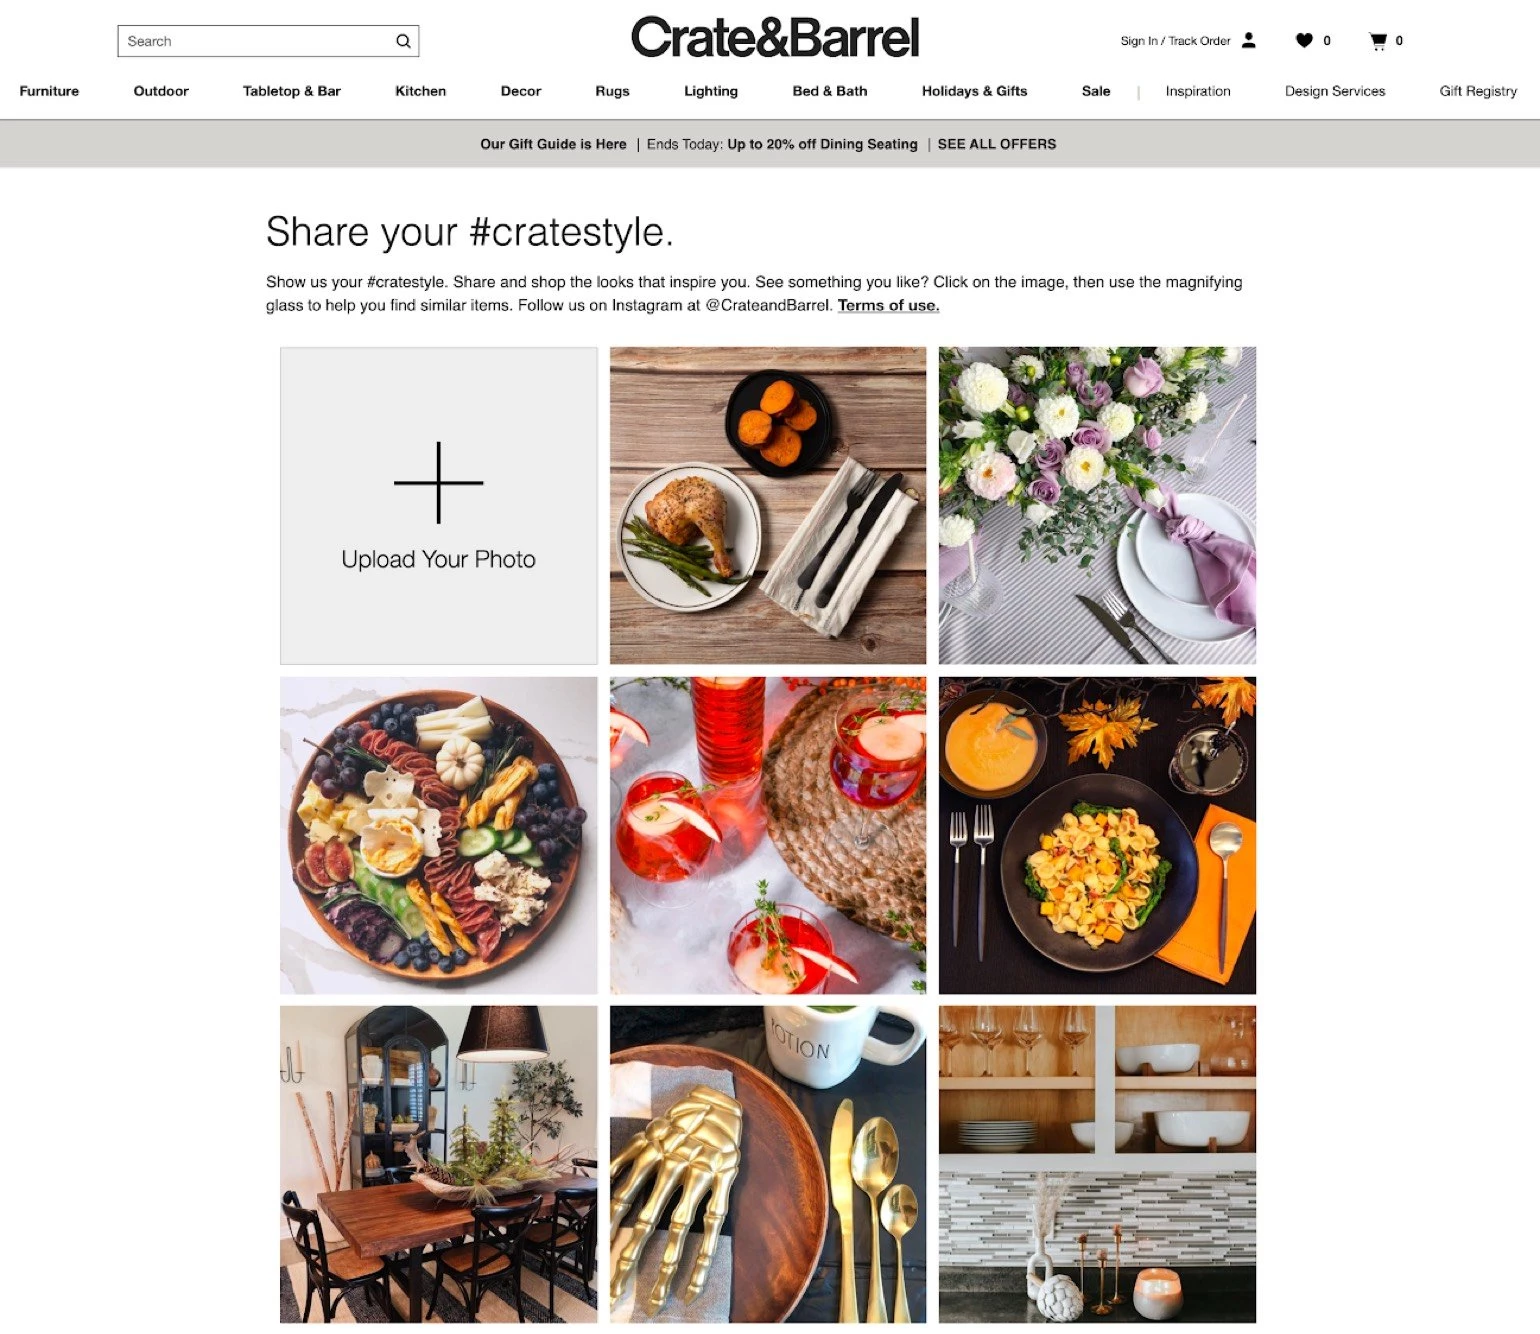 crate barrel landing page user generated content instagram style